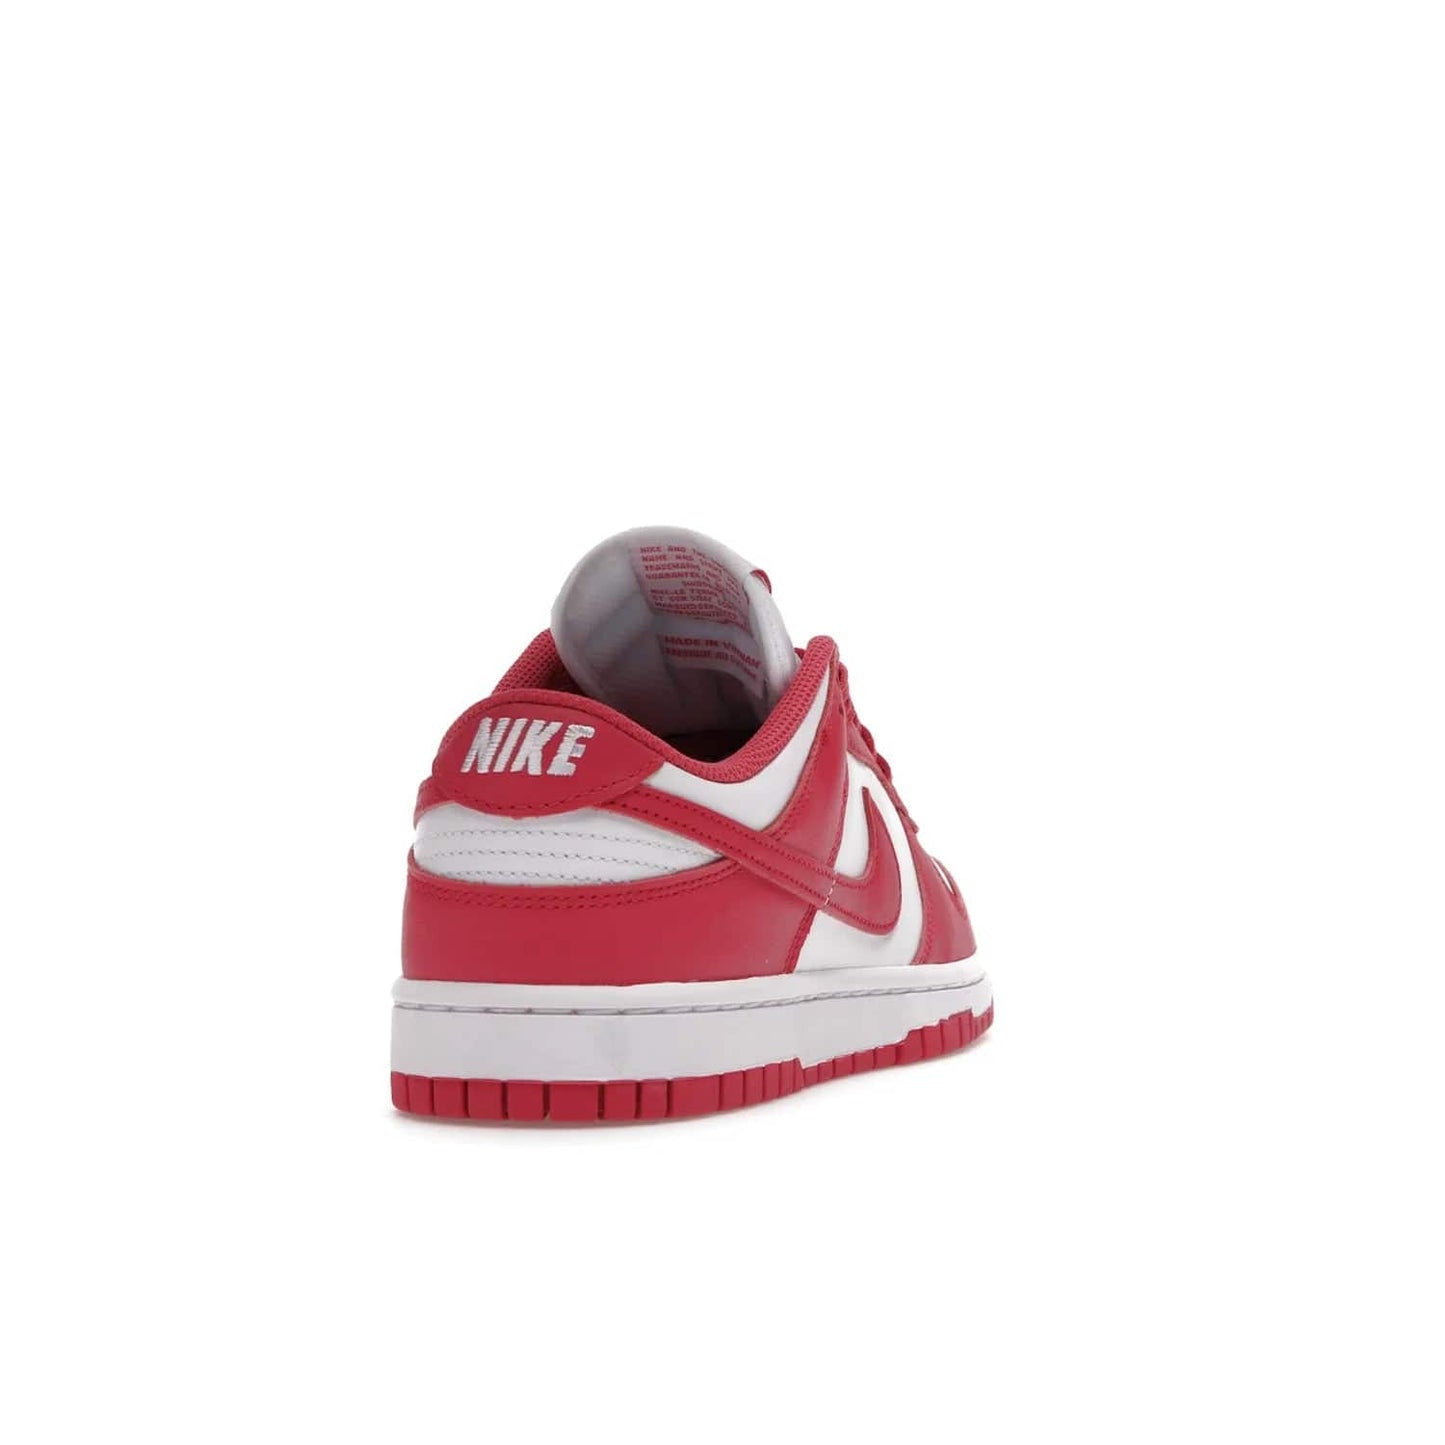 Nike Dunk Low Archeo Pink (Women's) - Image 30 - Only at www.BallersClubKickz.com - Introducing the stylish and comfortable Nike Dunk Low Archeo Pink (Women's). White/Archeo Pink colorway with white leather upper, pink overlays and Swooshes. Get yours now!